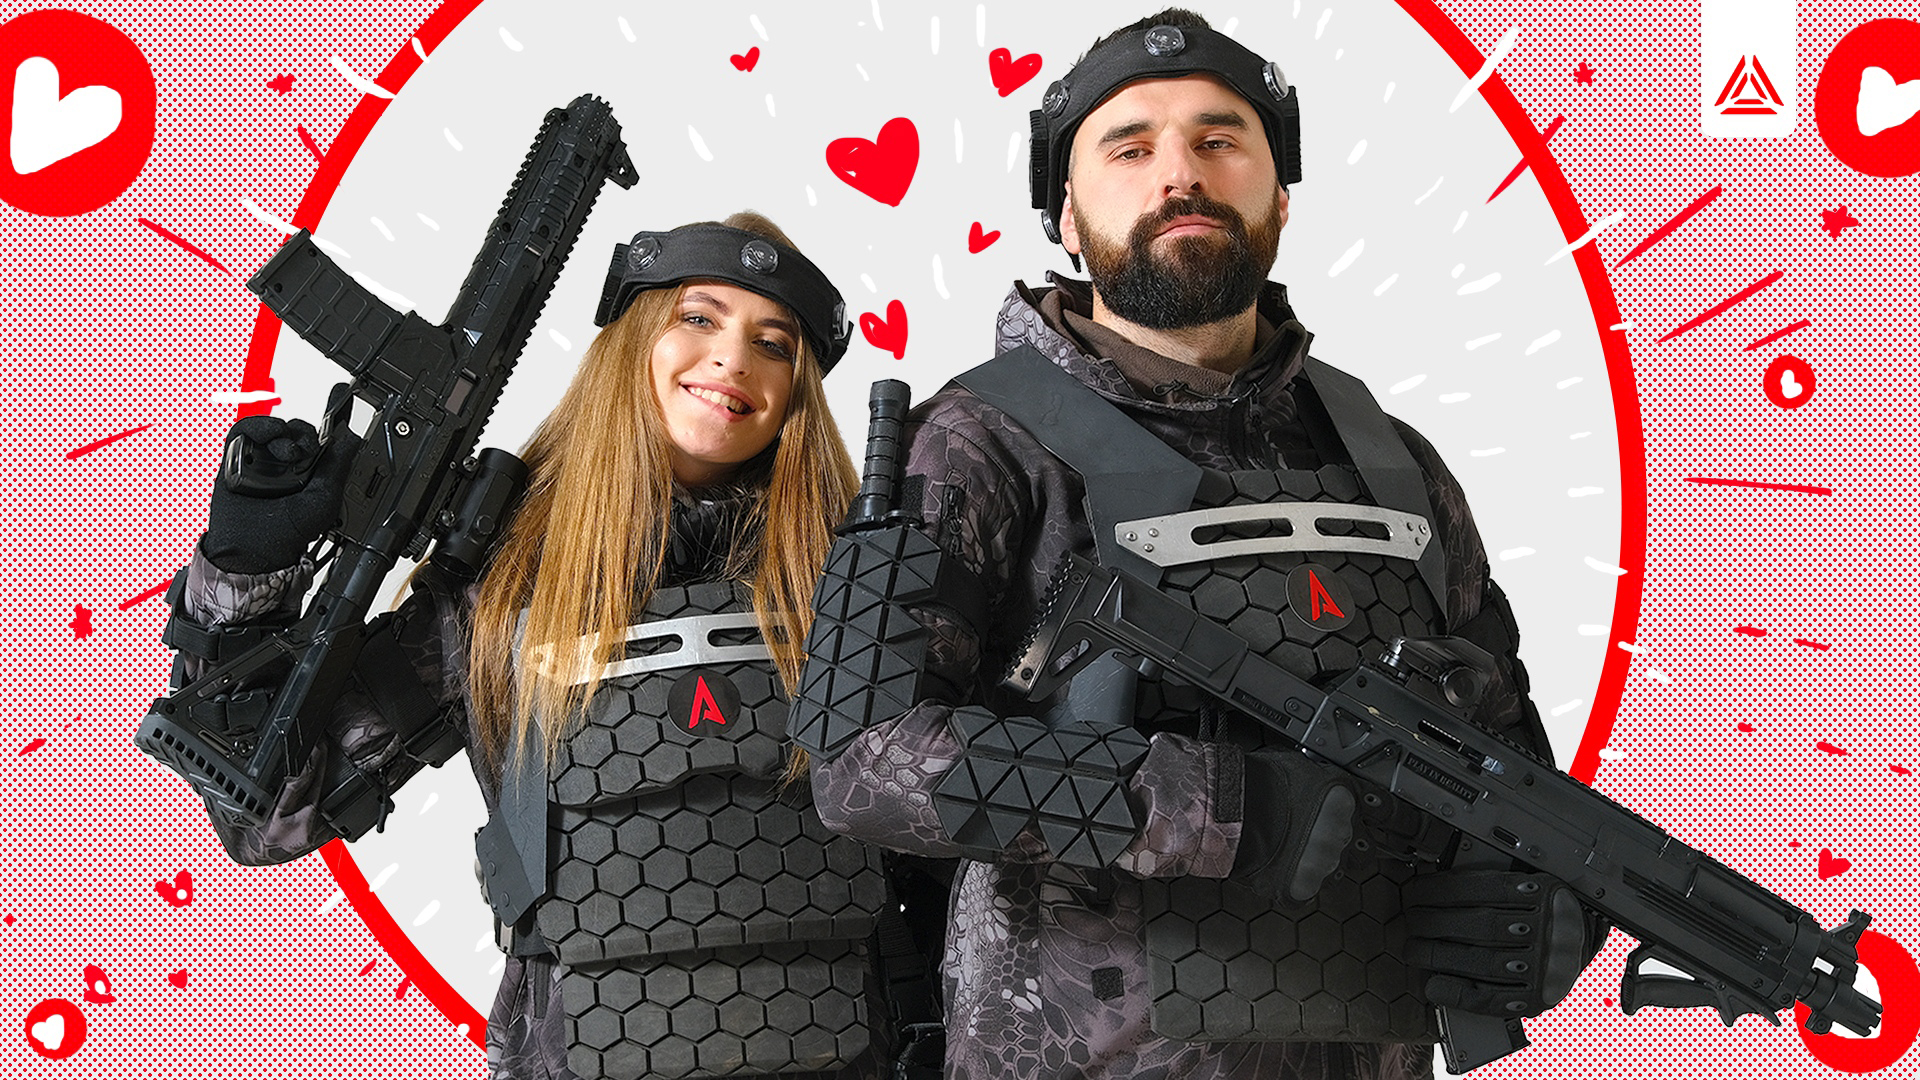 Top 5 laser tag gifts for sweethearts